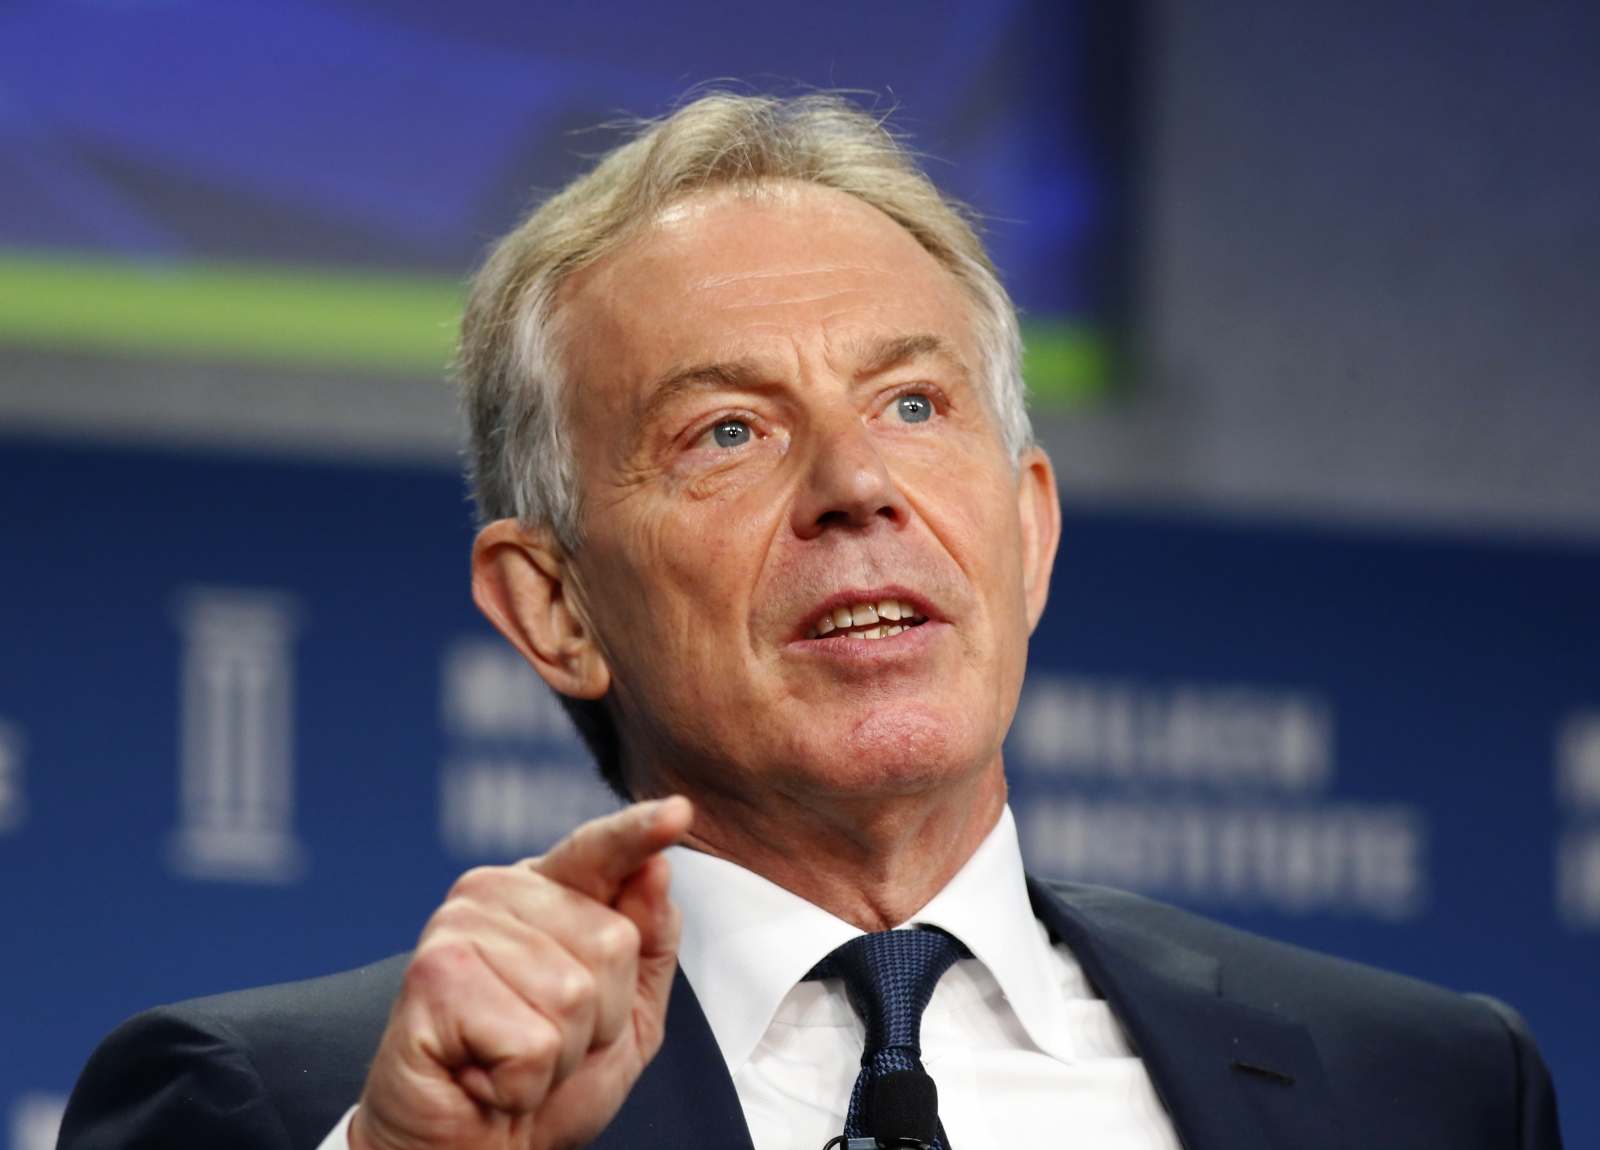 Tony Blair calls for democratic reform across the free world to counter